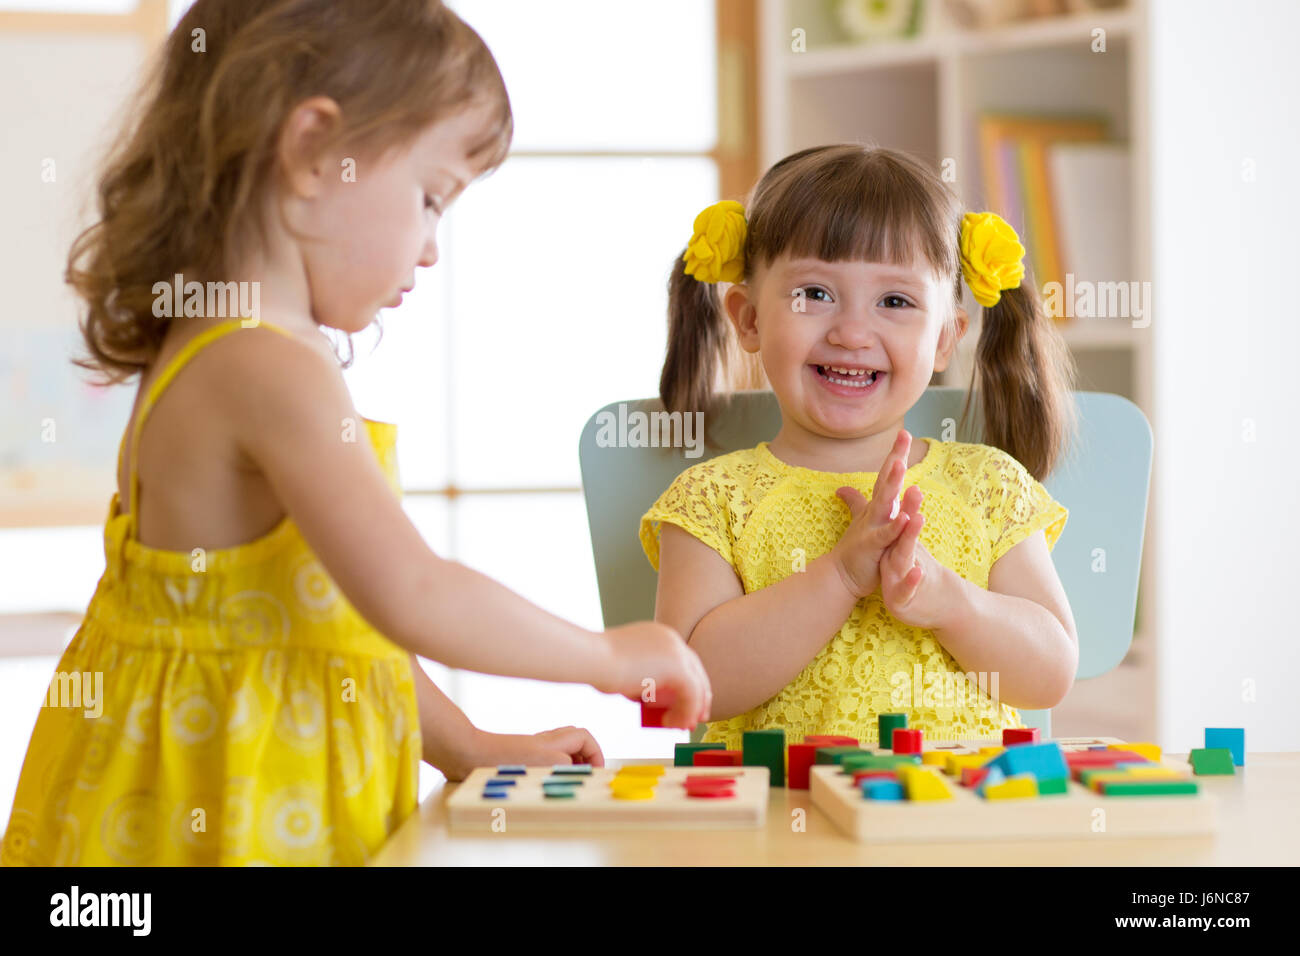 Children kids play with educational toys, arranging and sorting colors and shapes. Learning via experience conception. Stock Photo